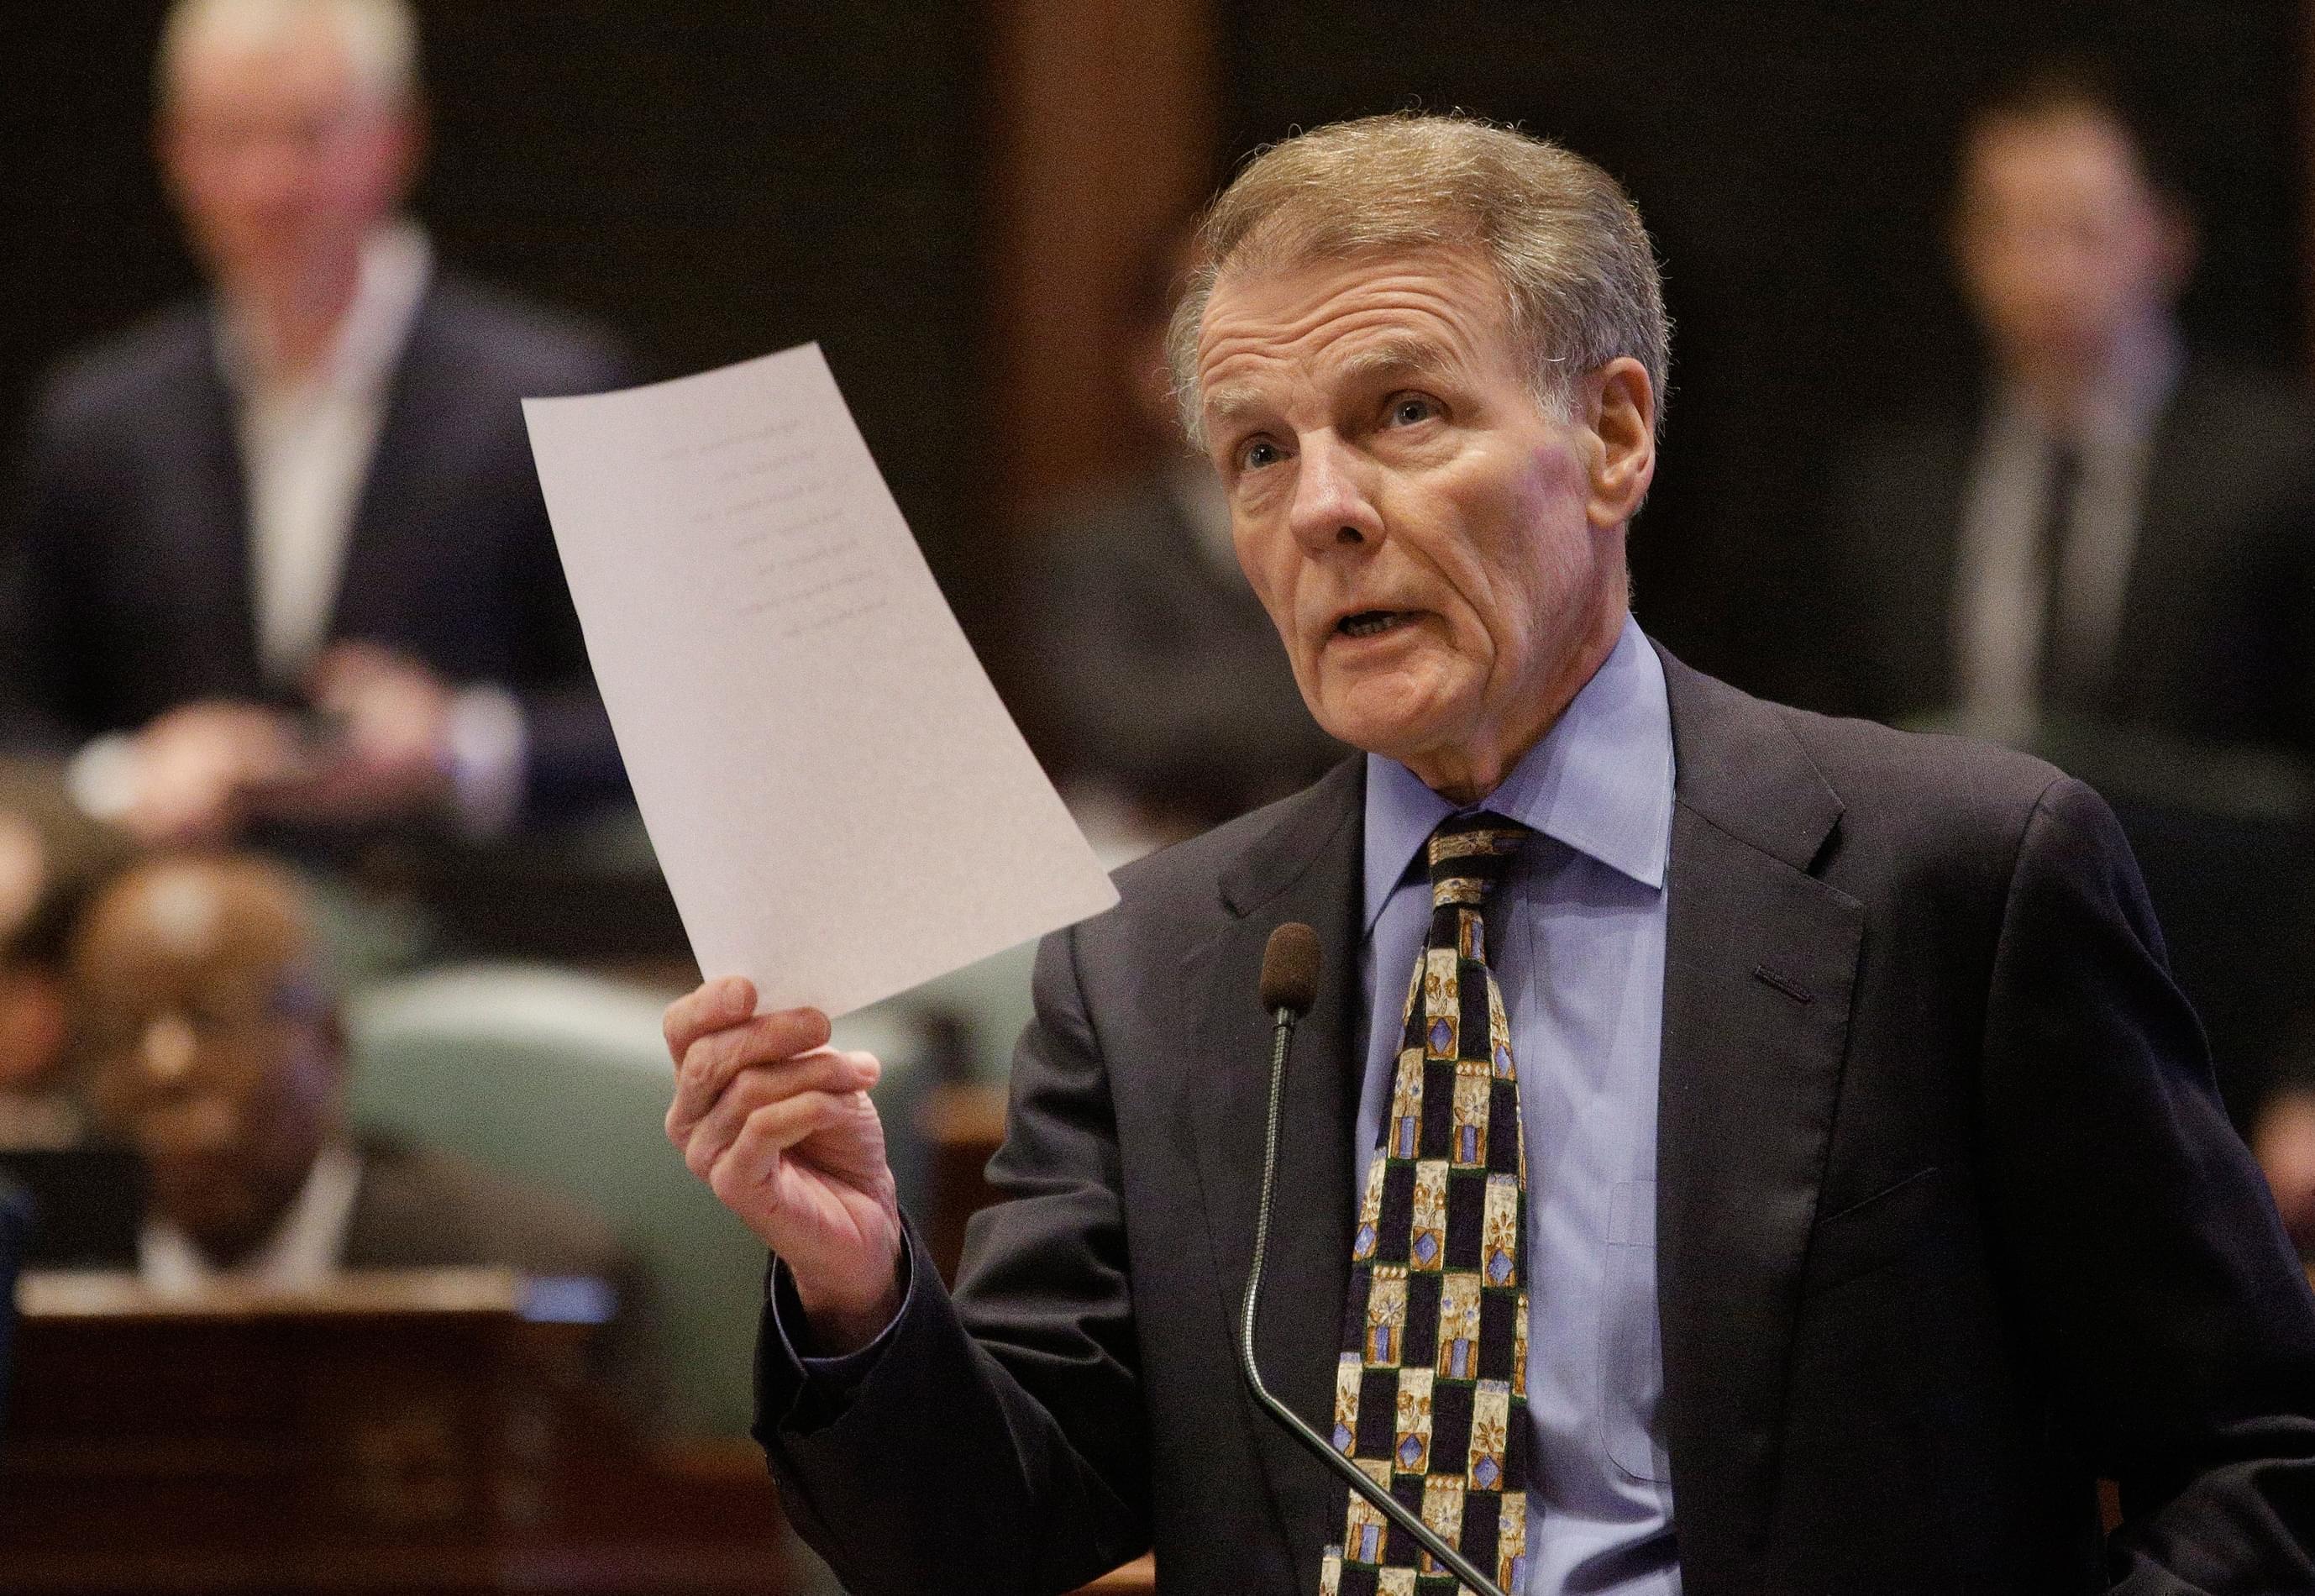 Illinois Speaker of the House Michael Madigan, D-Chicago, speaks to lawmakers while on the House floor during session at the Illinois State Capitol Tuesday in Springfield. Democrats in the General Assembly continue attempts at flanking the Republican